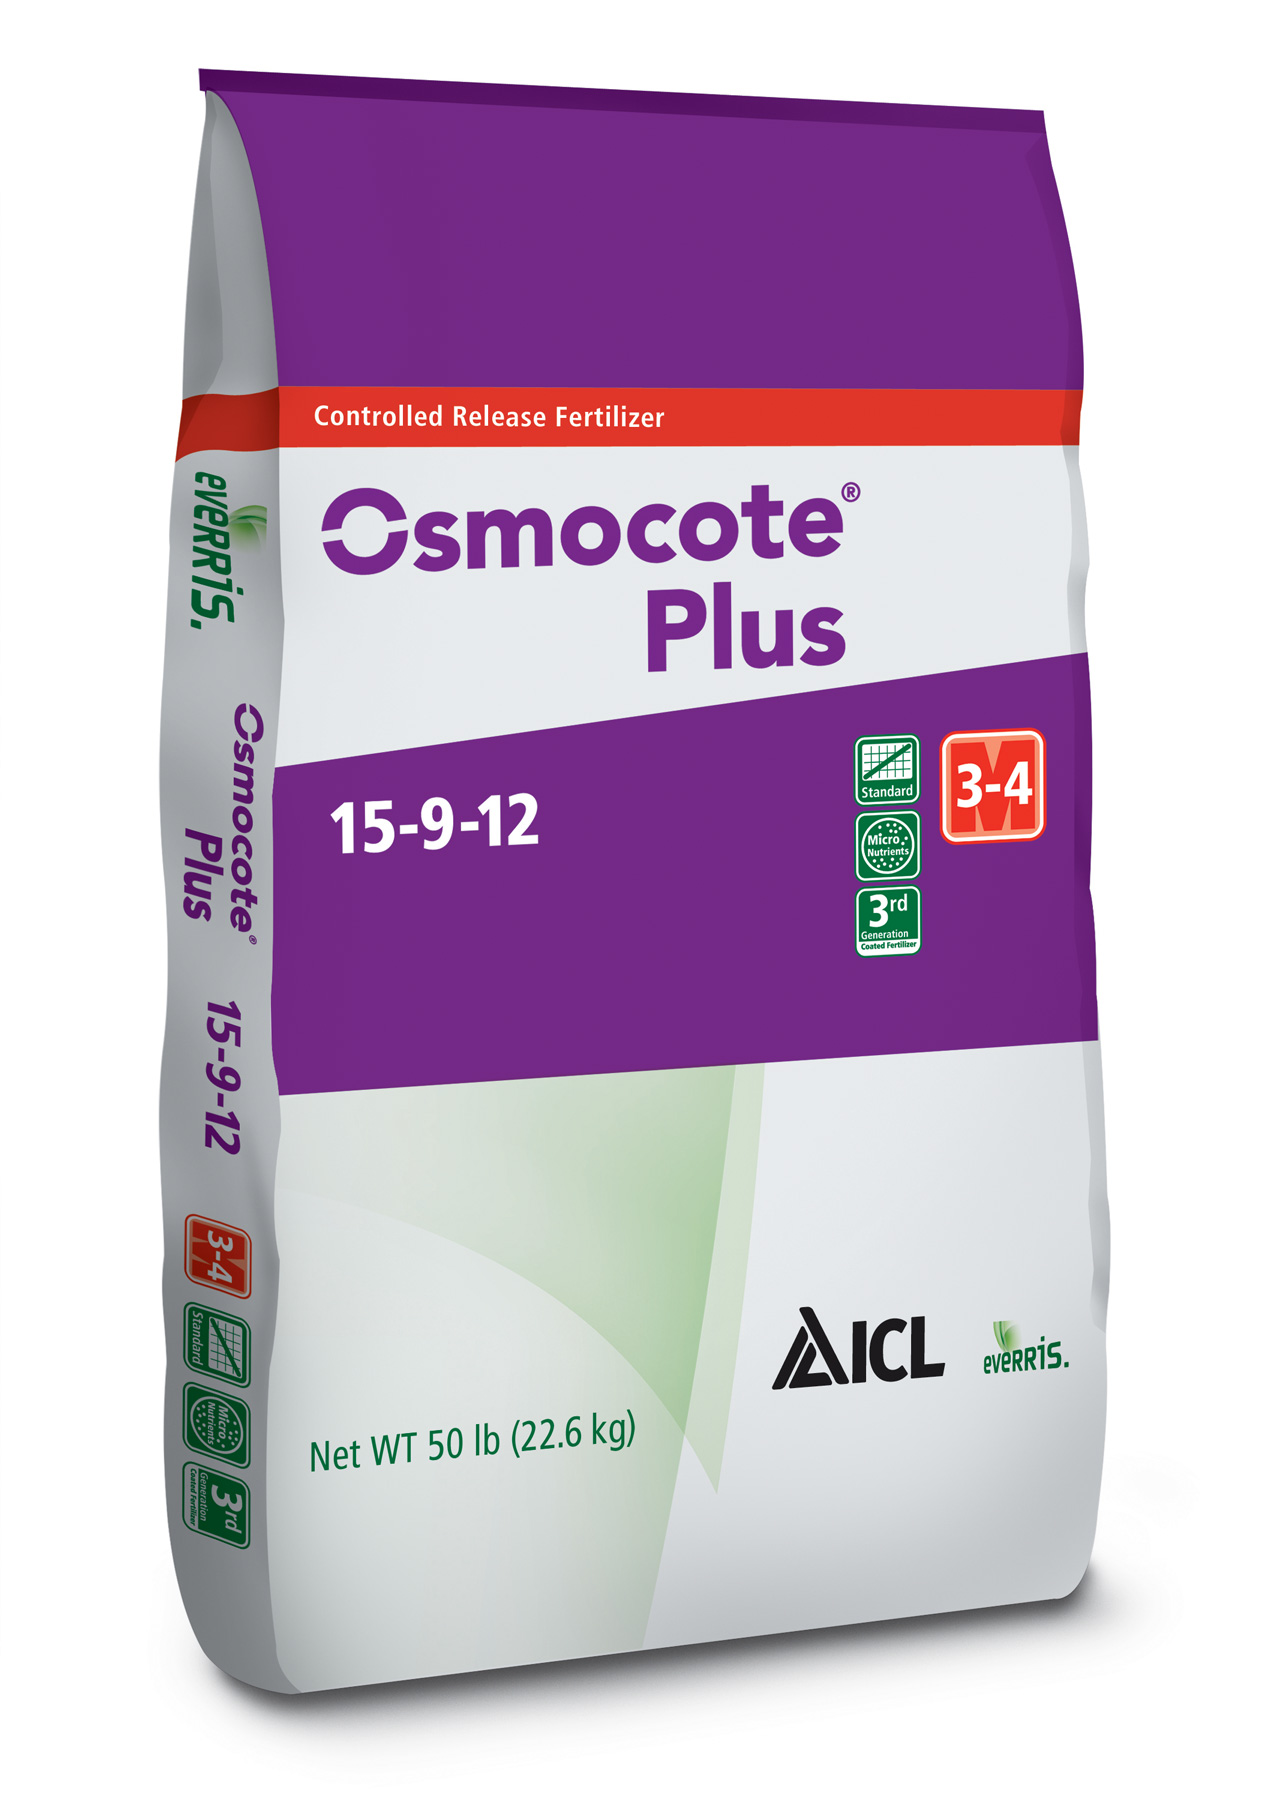 Osmocote® Plus 15-9-12 3-4M 50 lb Bag - Controlled Release CRF